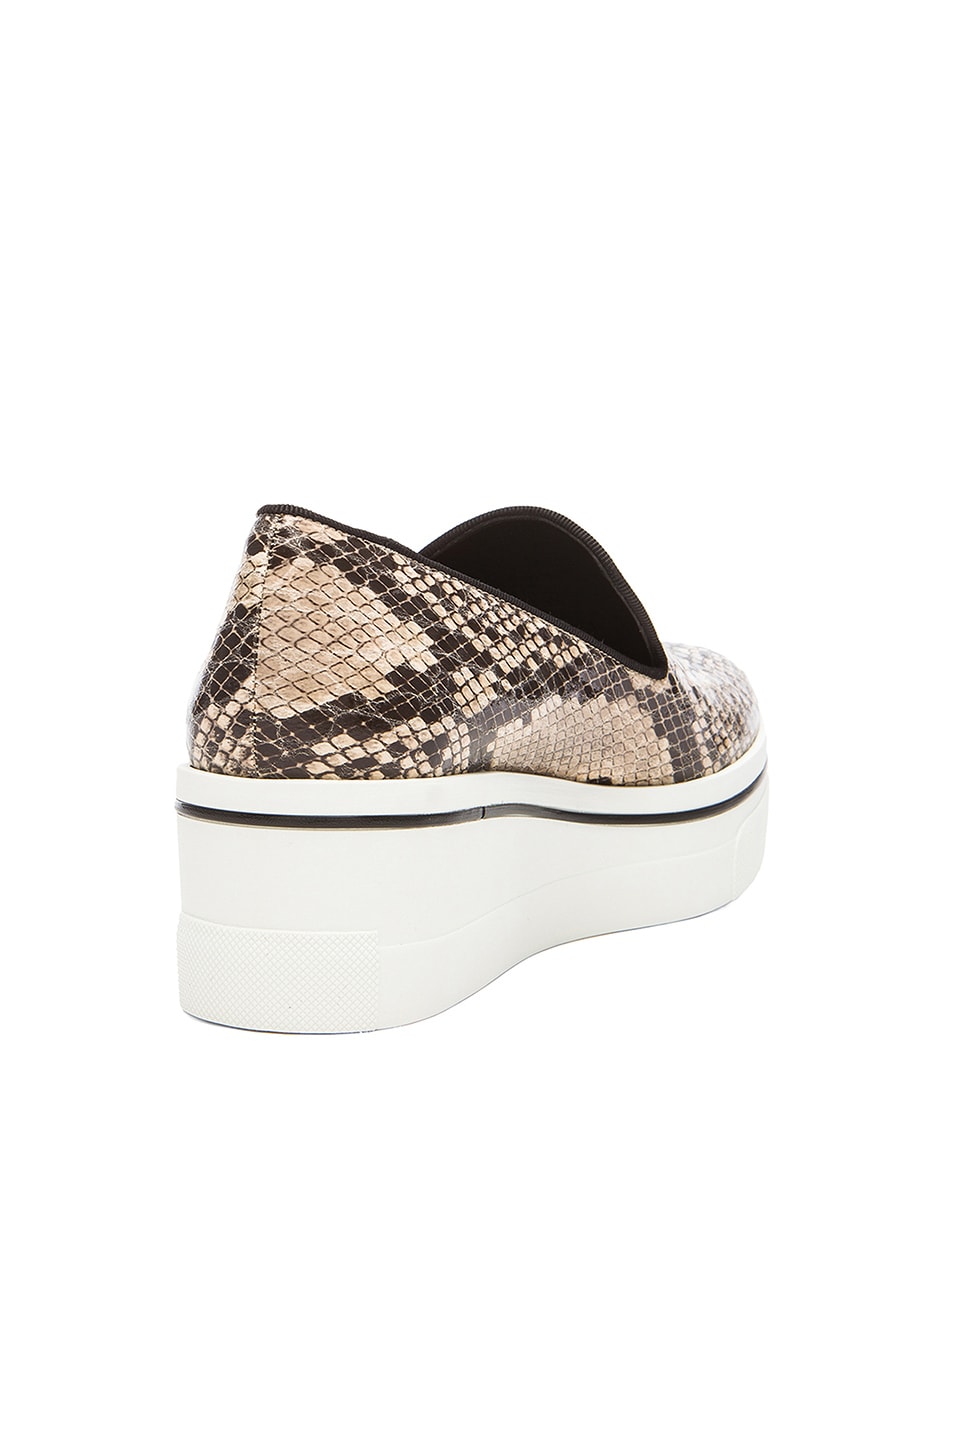 STELLA MCCARTNEY Python Embossed Faux Leather Creepers In Dust & Black